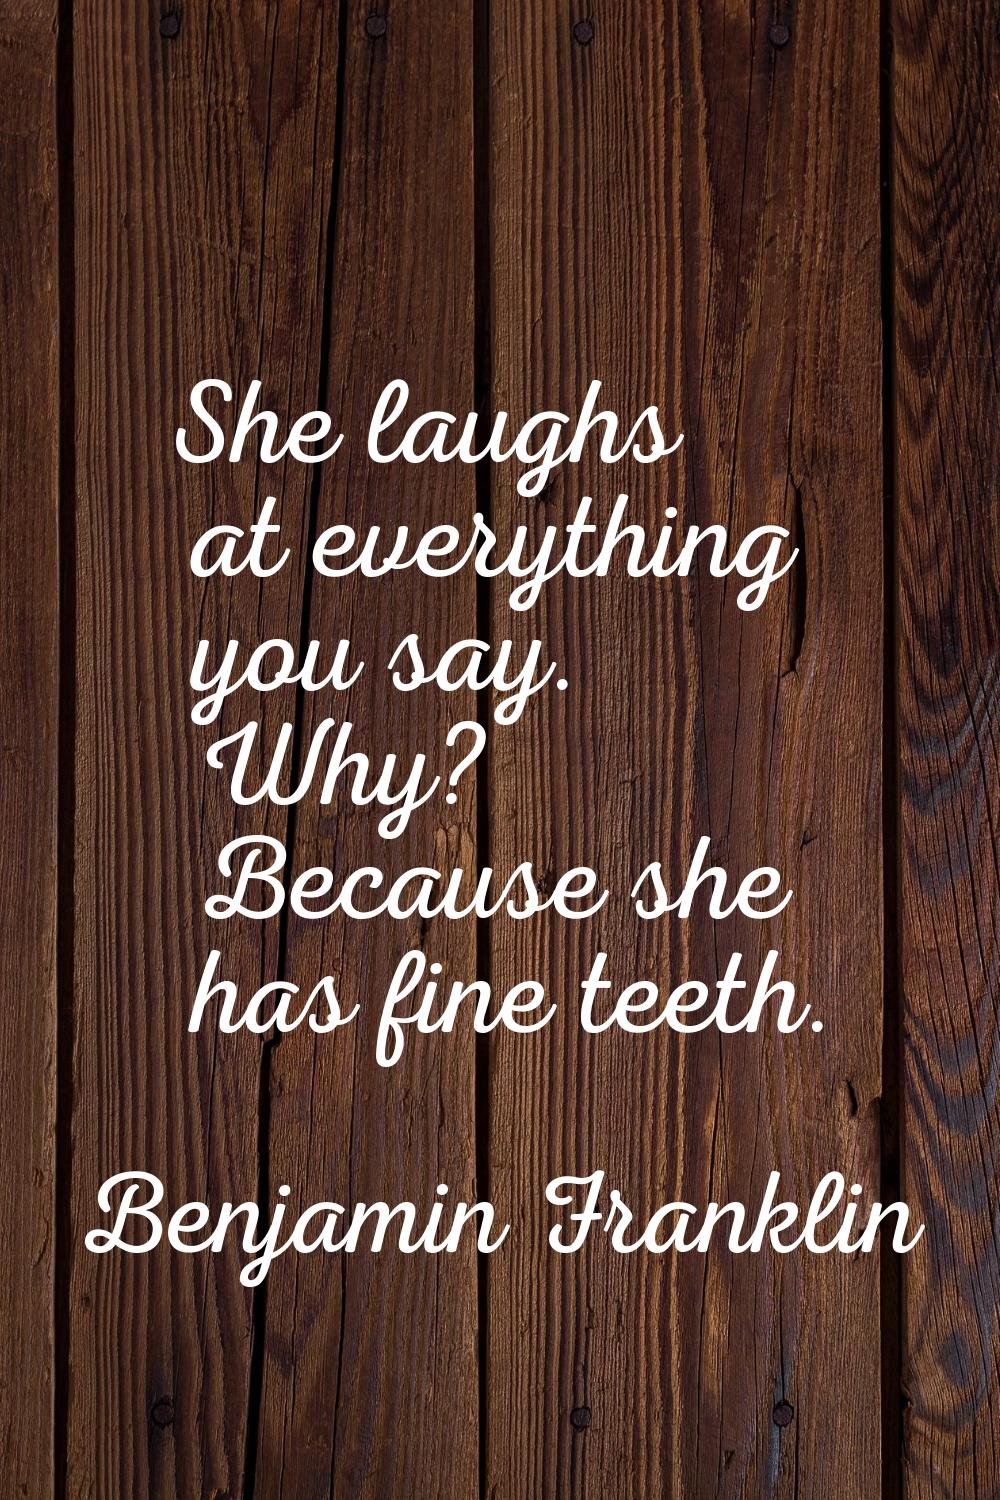 She laughs at everything you say. Why? Because she has fine teeth.